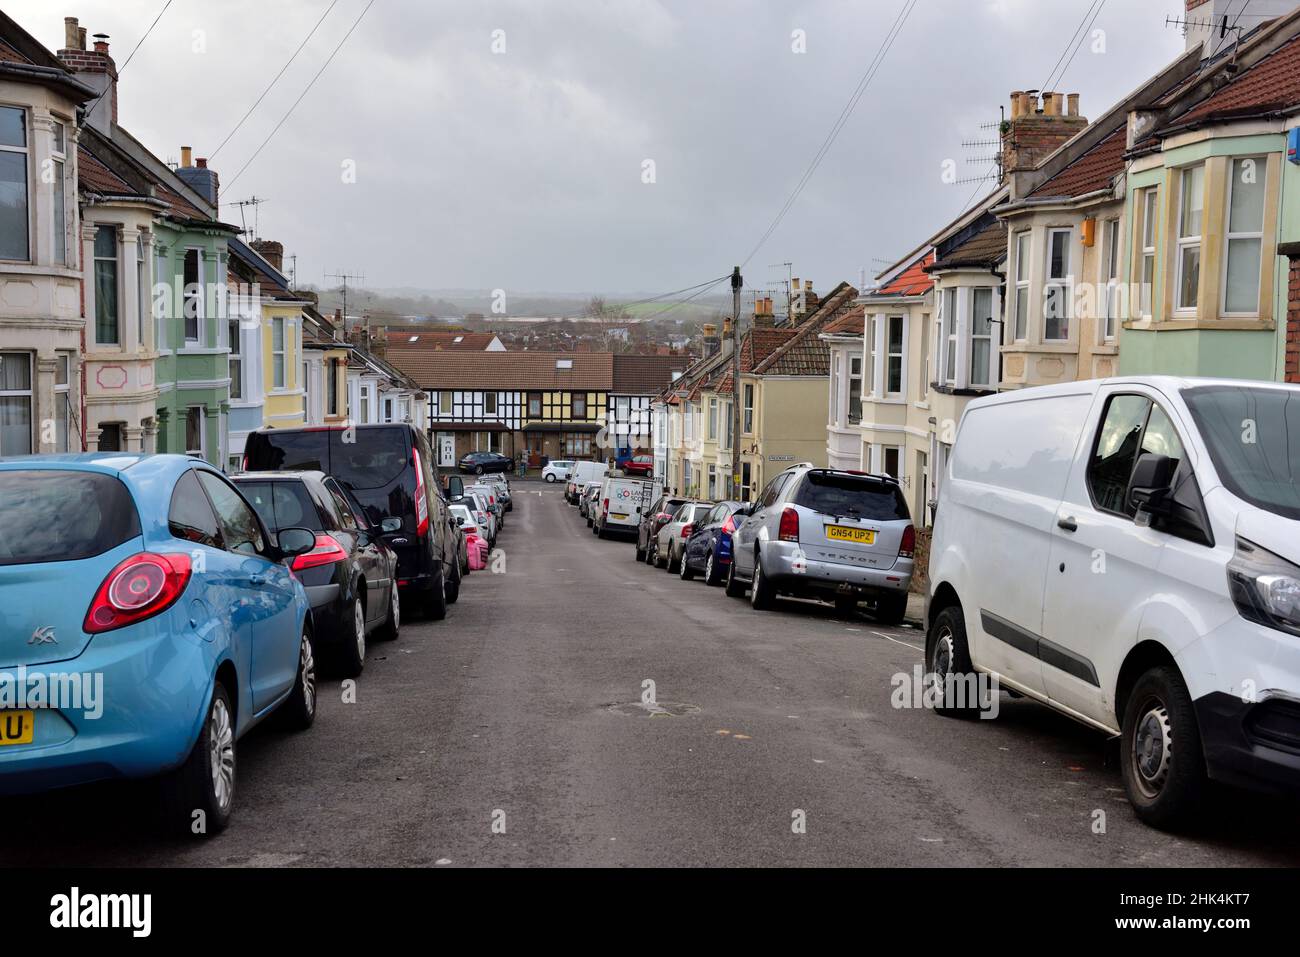 Small residential street in city with cars and vans parked on both sides of the road, Bristol, UK Stock Photo